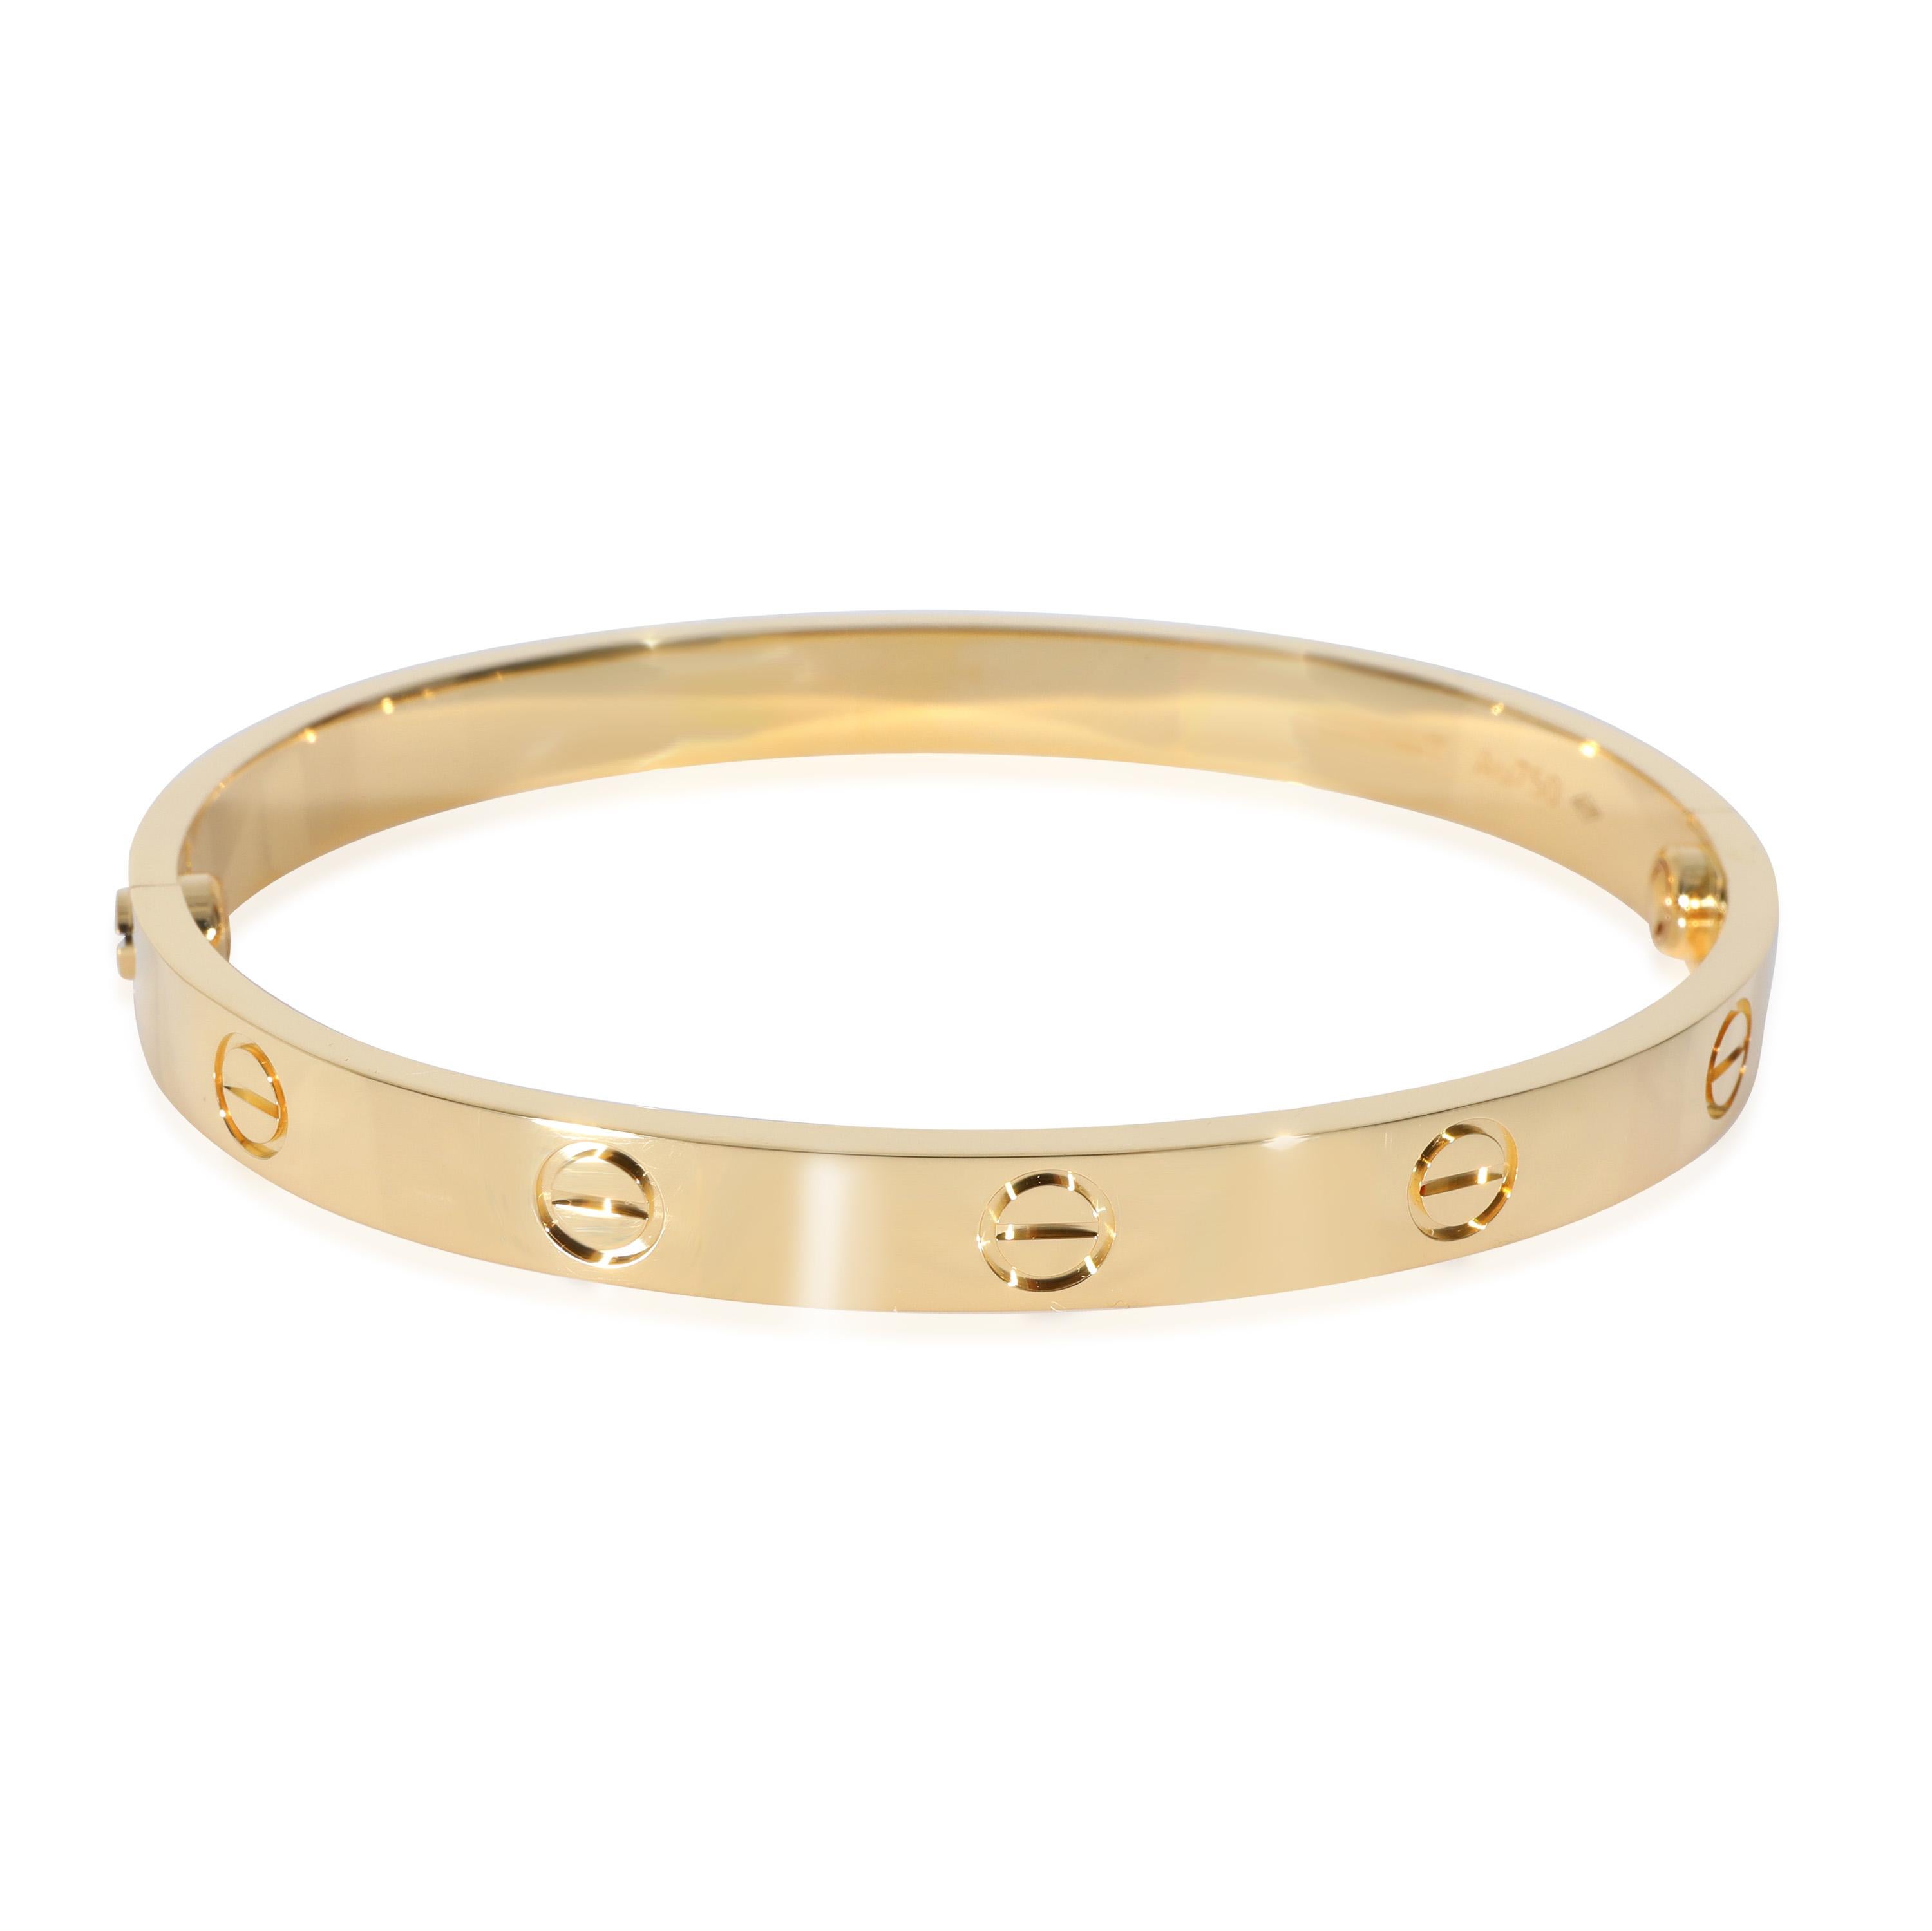 Cartier Love Bracelet in 18k Yellow Gold

PRIMARY DETAILS
SKU: 130135
Listing Title: Cartier Love Bracelet in 18k Yellow Gold
Condition Description: Cartier's Love collection is the epitome of iconic, from the recognizable designs to the history